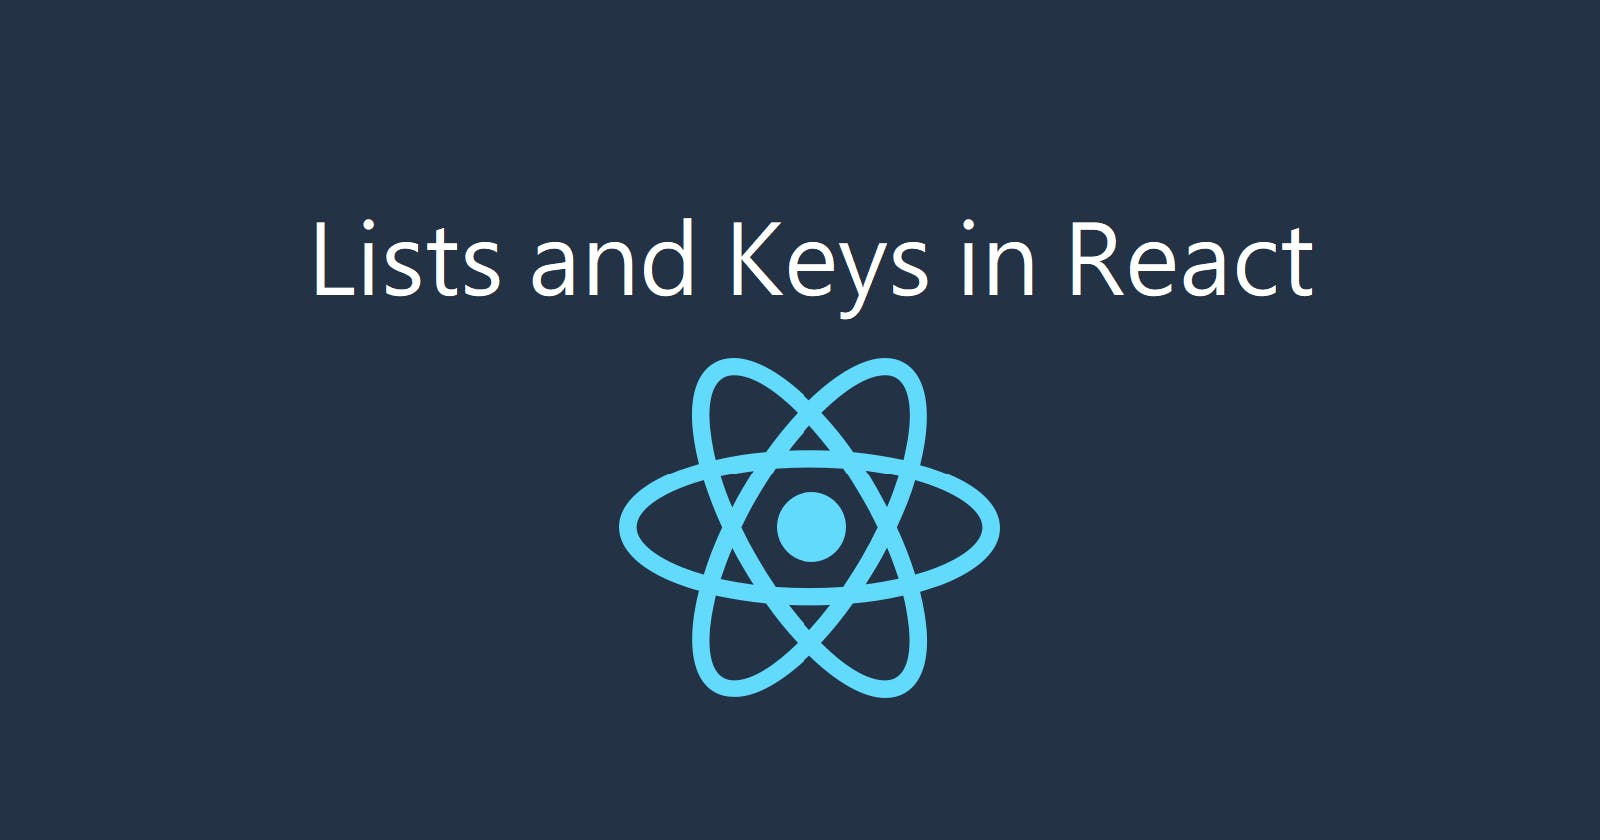 Day 8: Lists and Keys in React